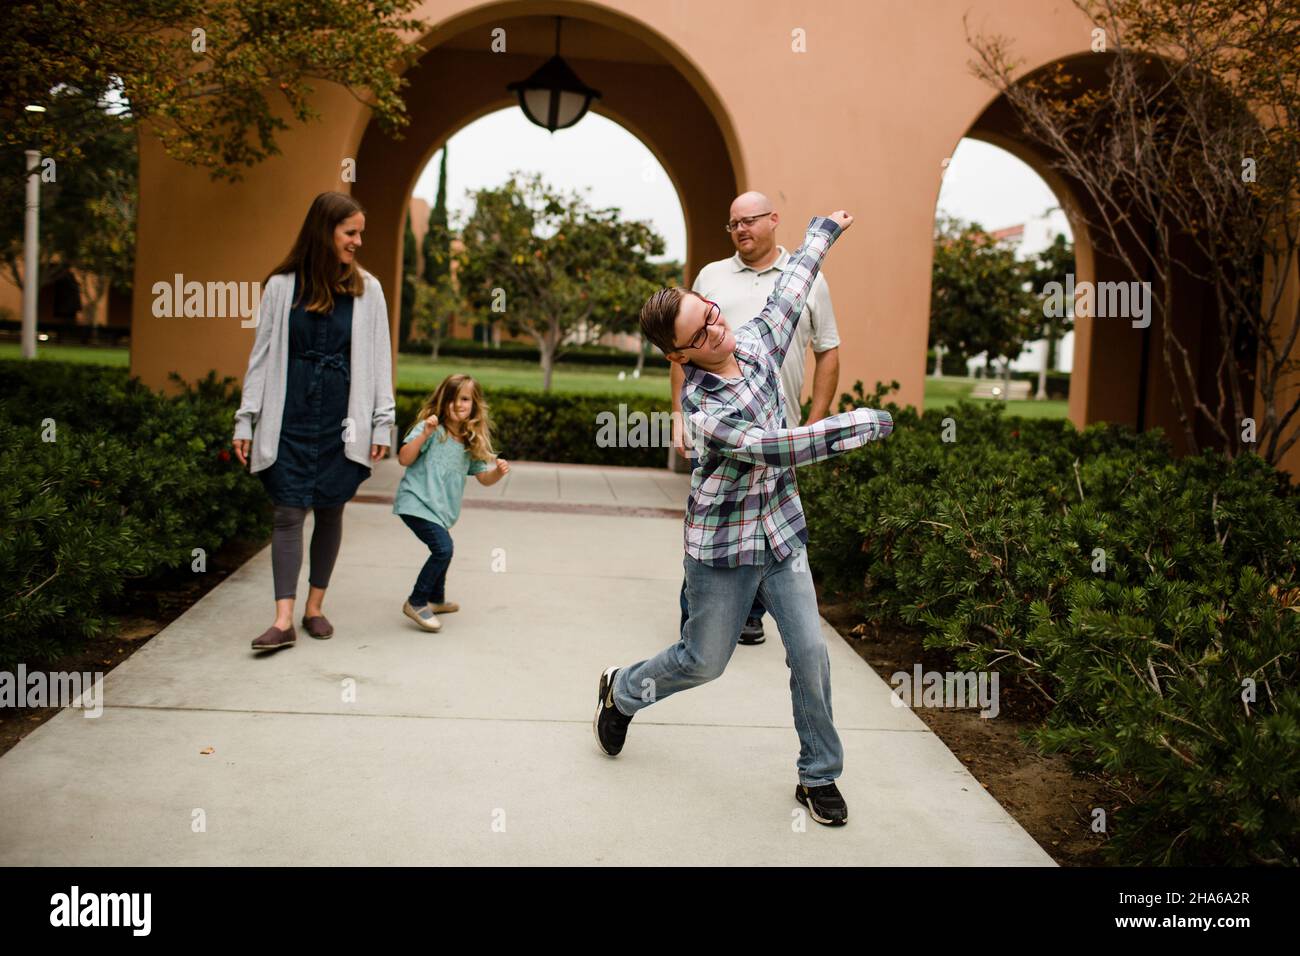 Ten Year Old Photo Bombing Family in San Diego Stock Photo